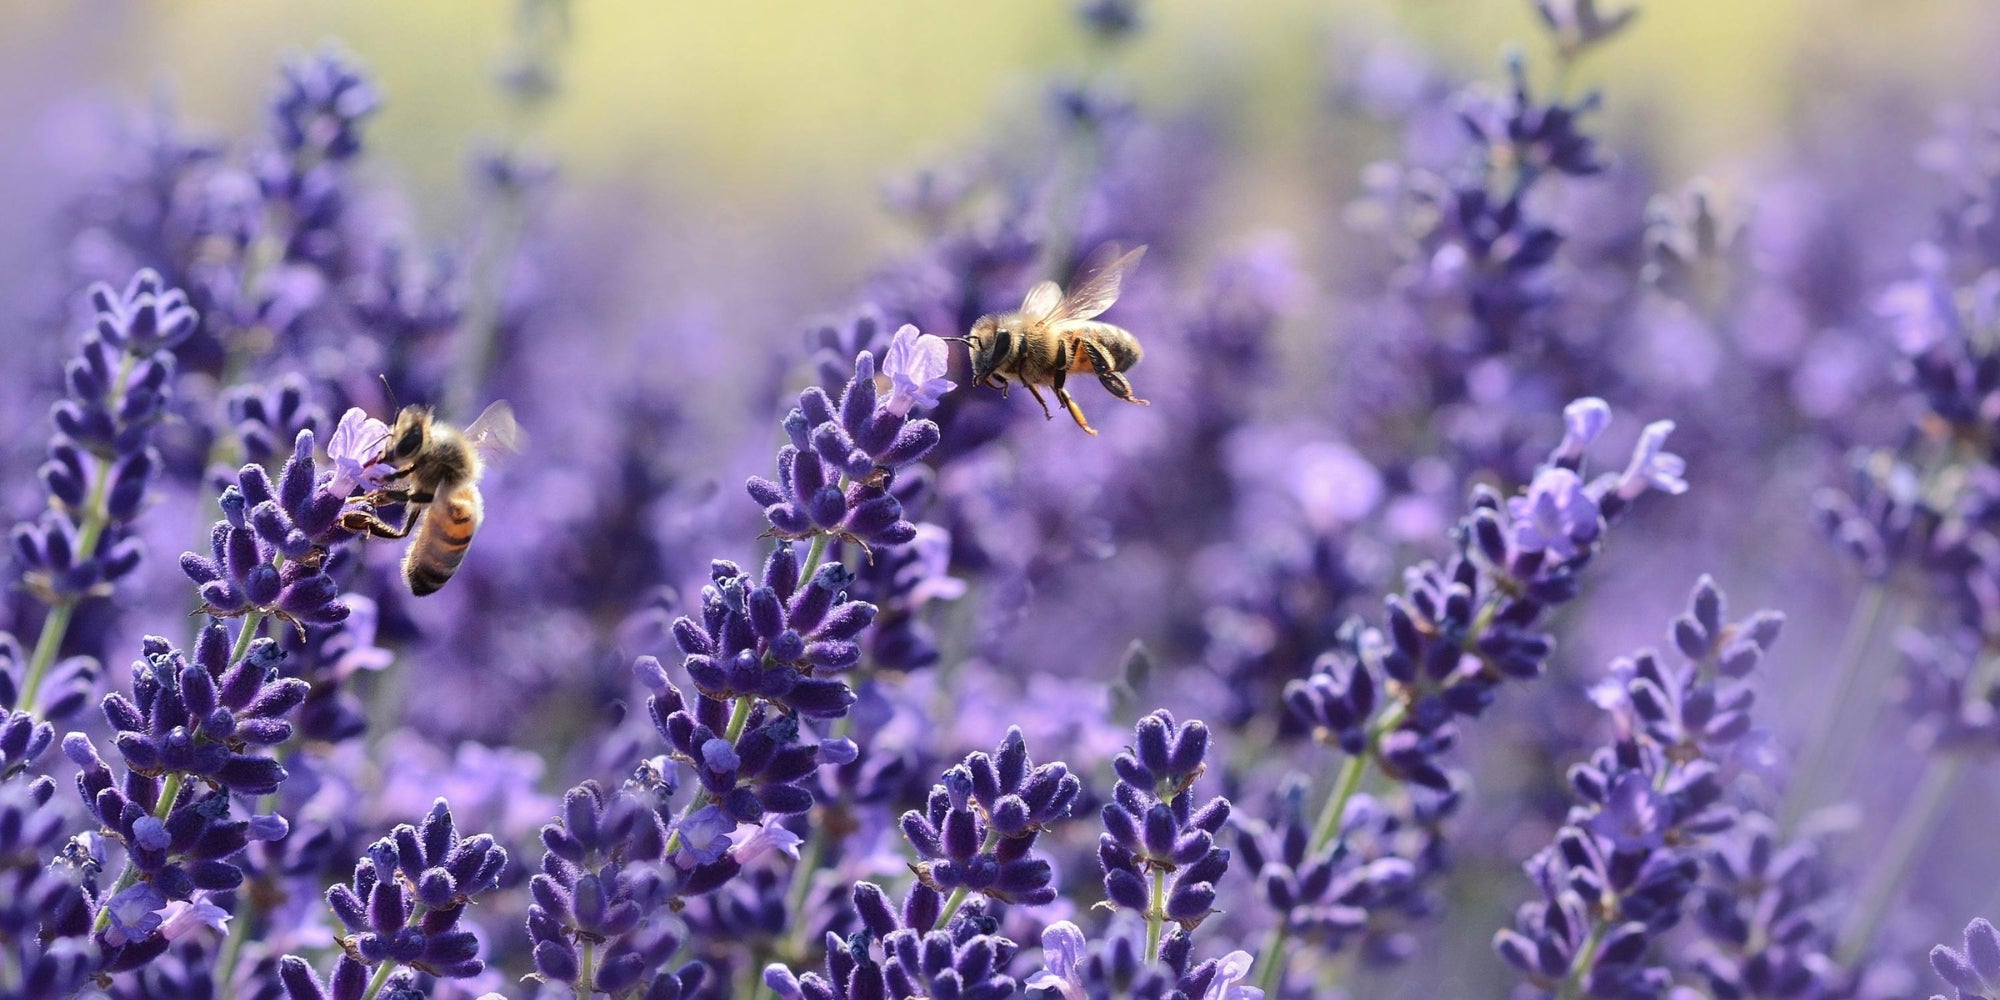 The Sweet Scent of Sleep: The Effects of Diffusing Lavender Essential Oil